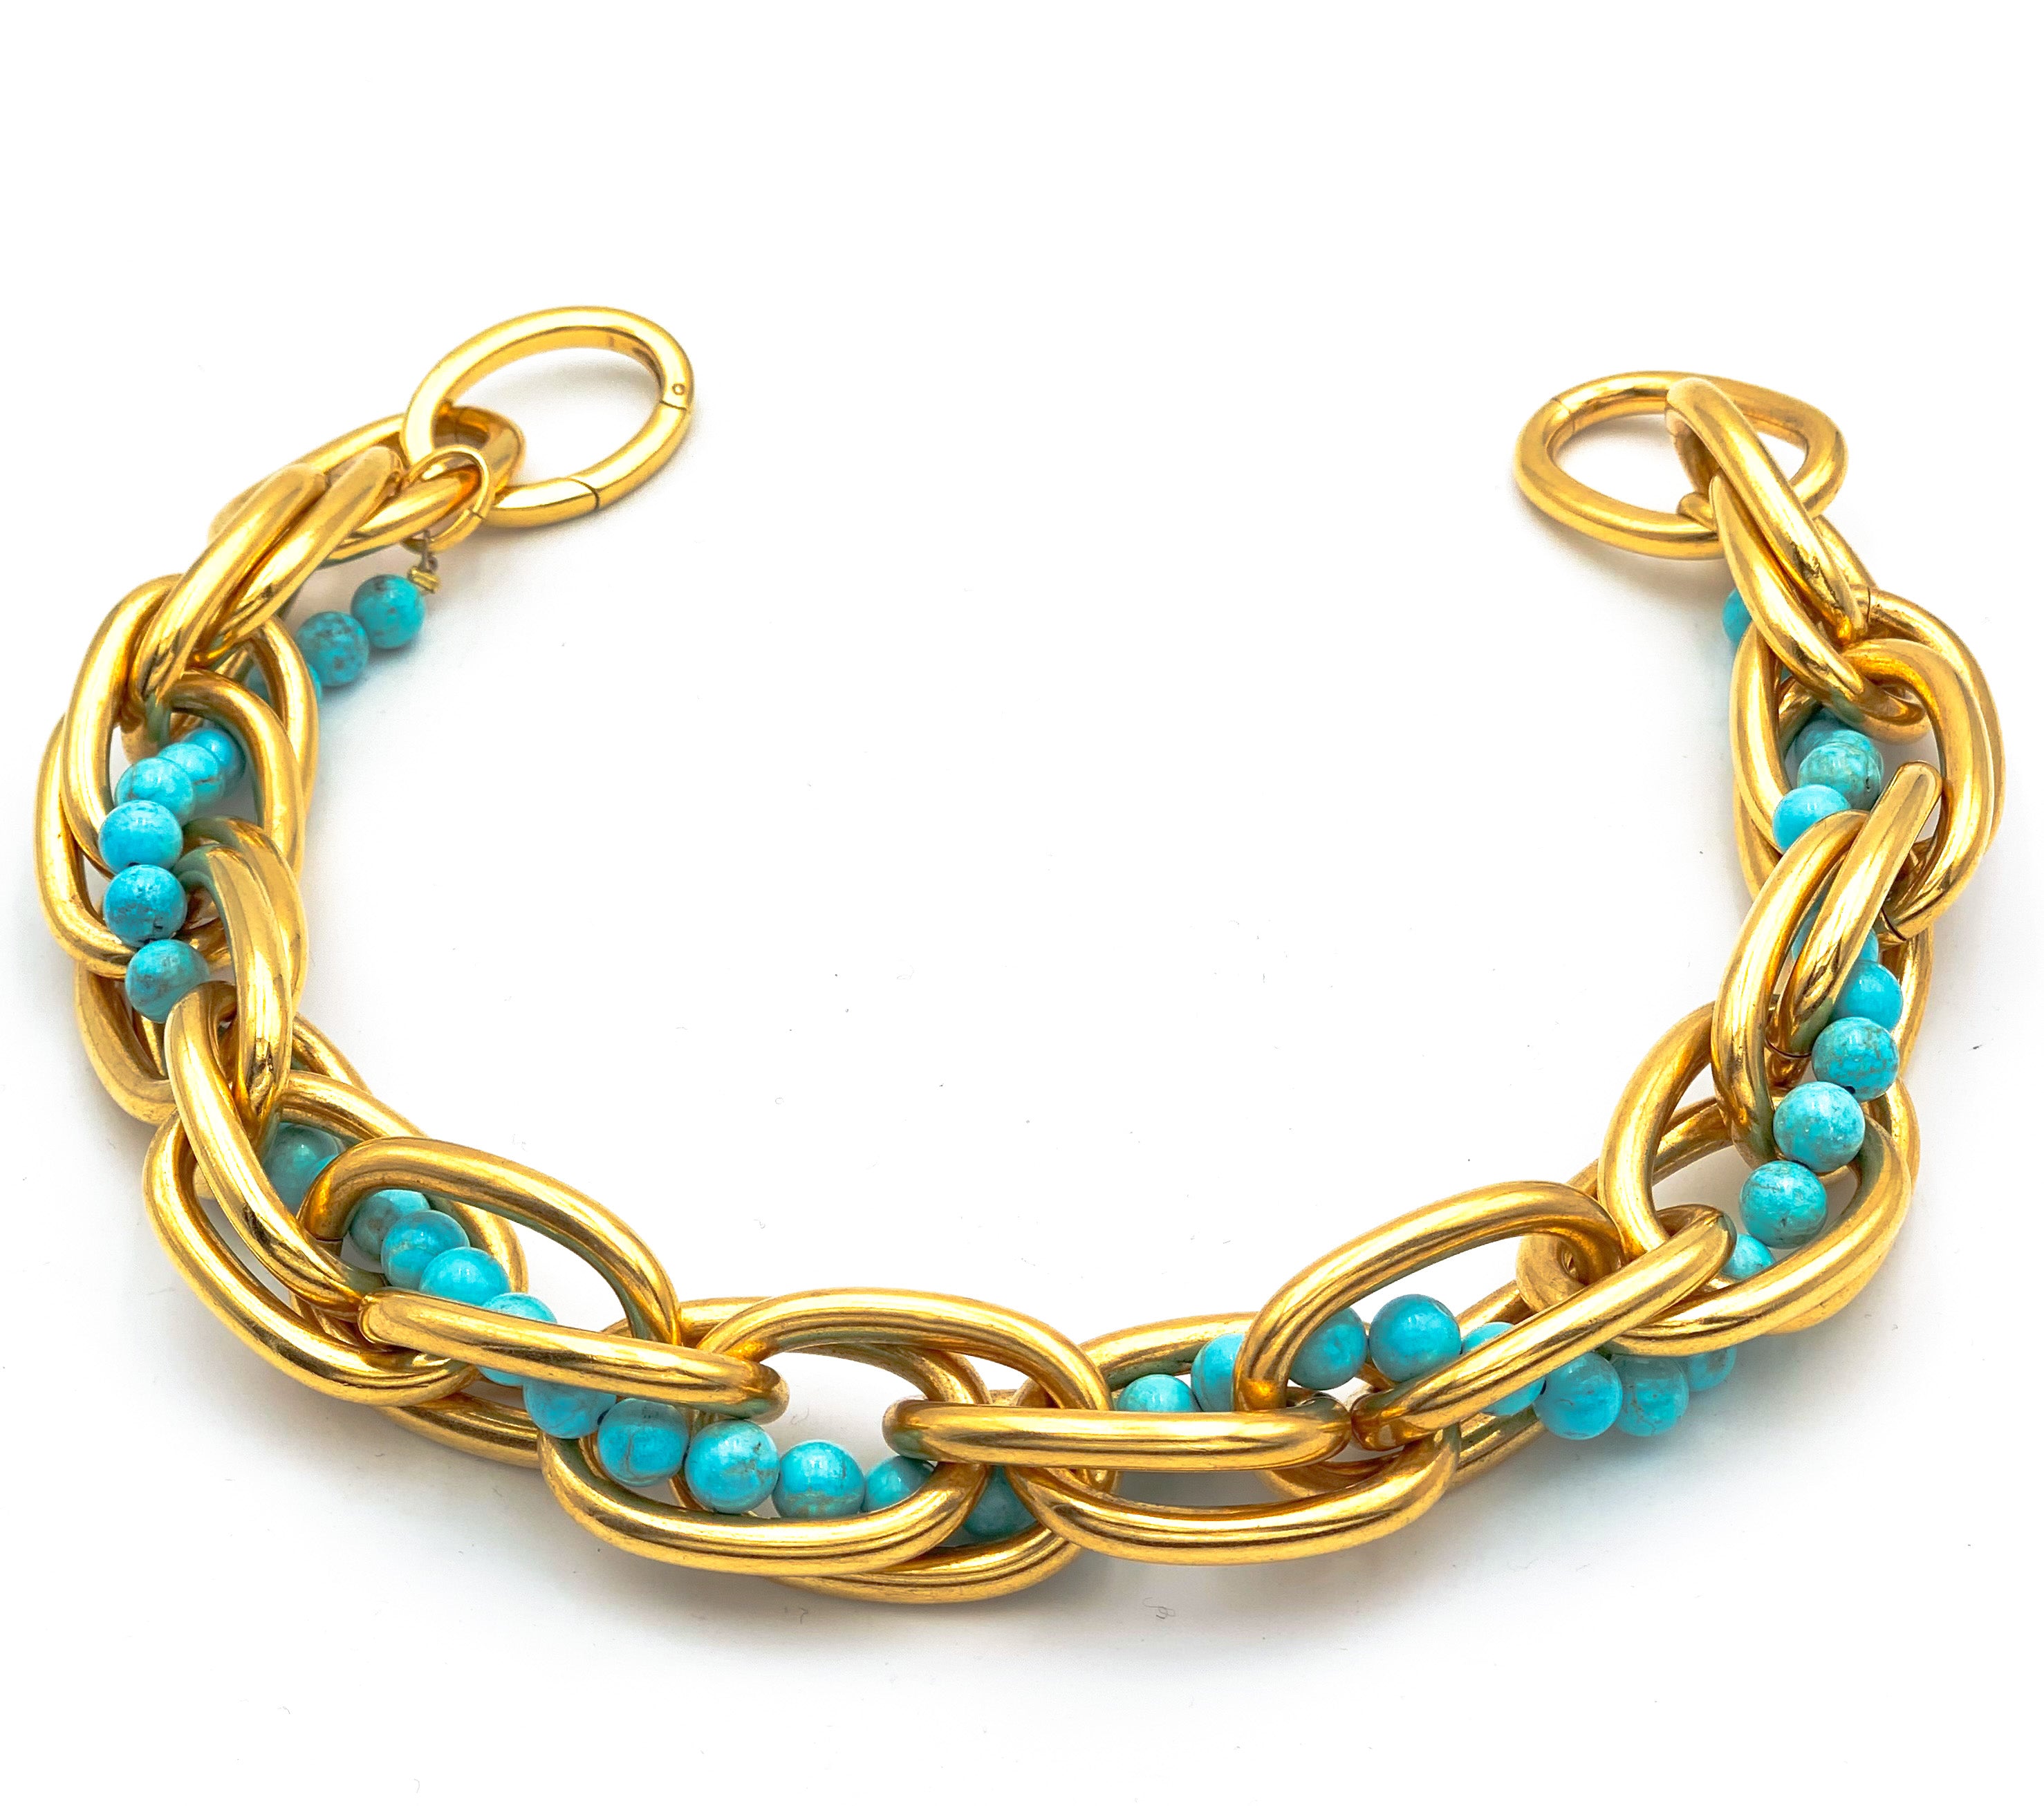 COLLIER MONCEAU MIX GOLD/TURQUOISE